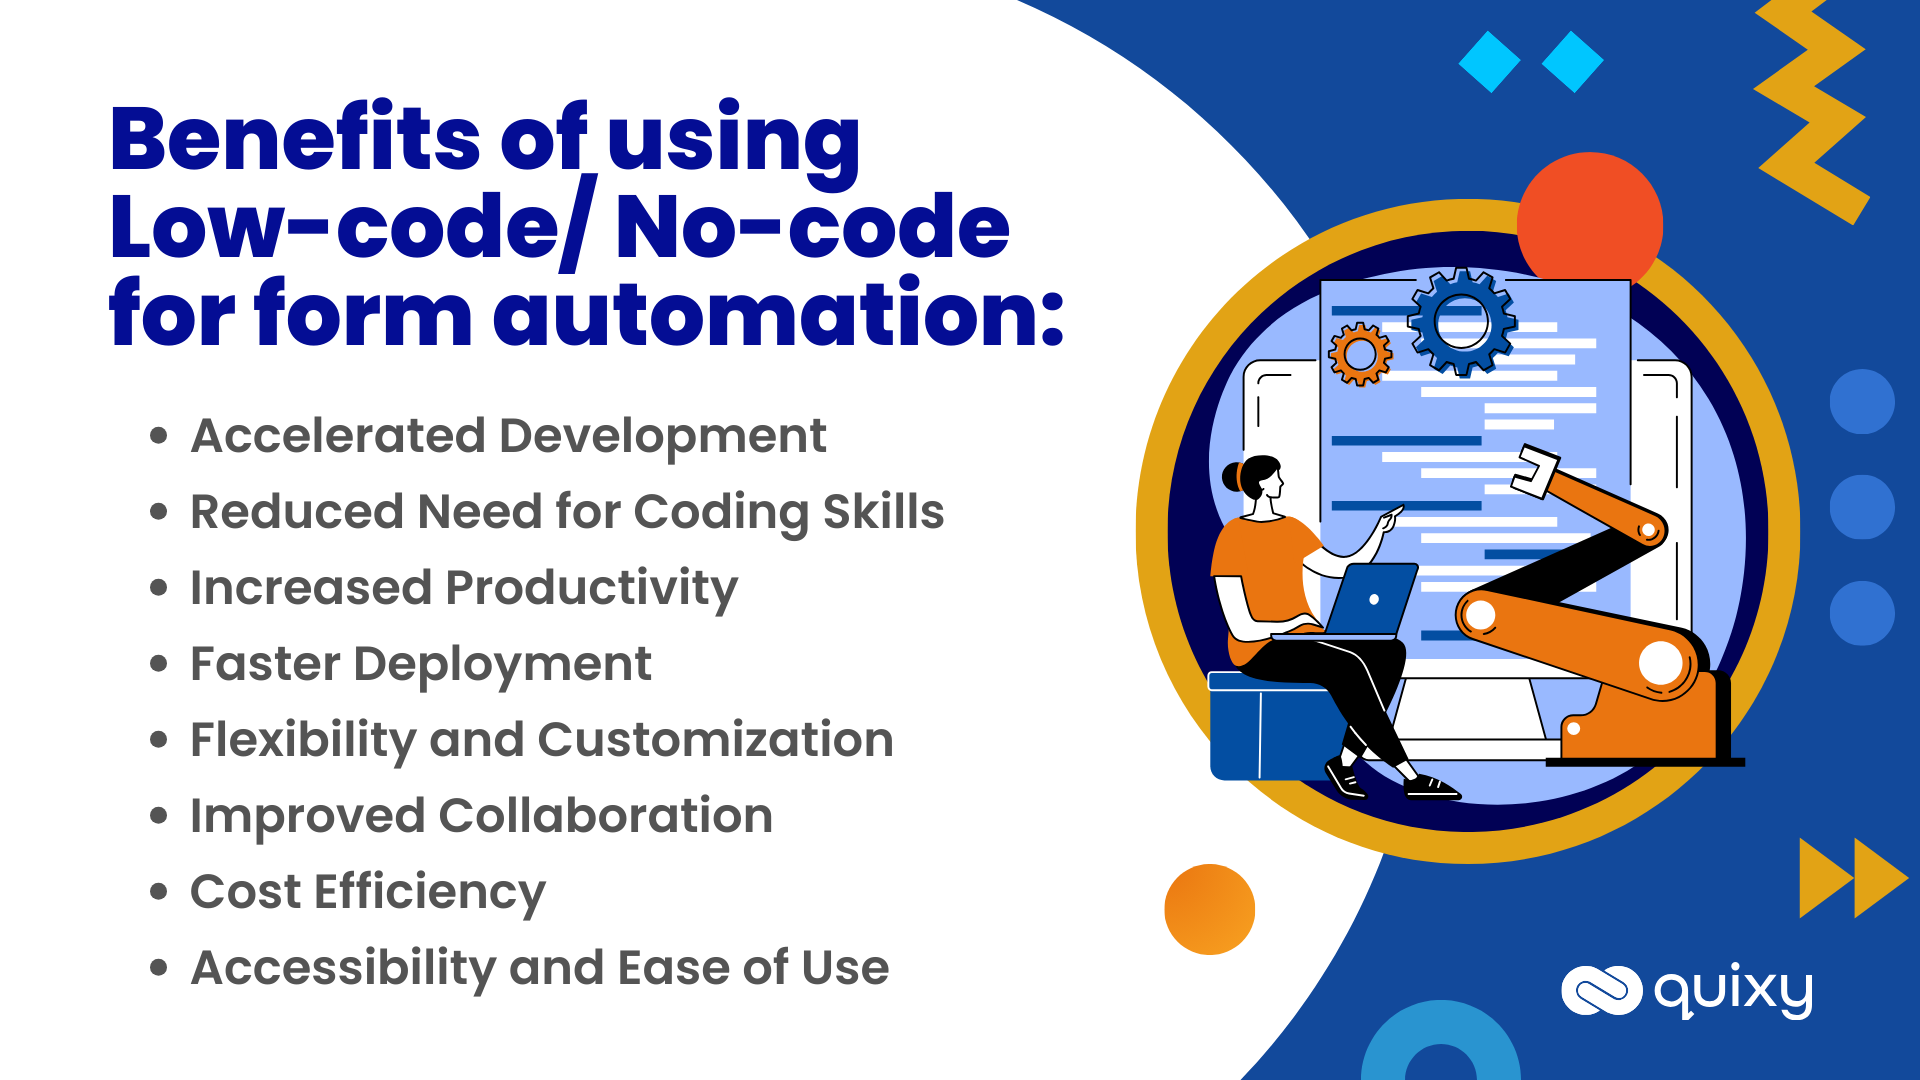 benefits for Low-code no-code for form automation